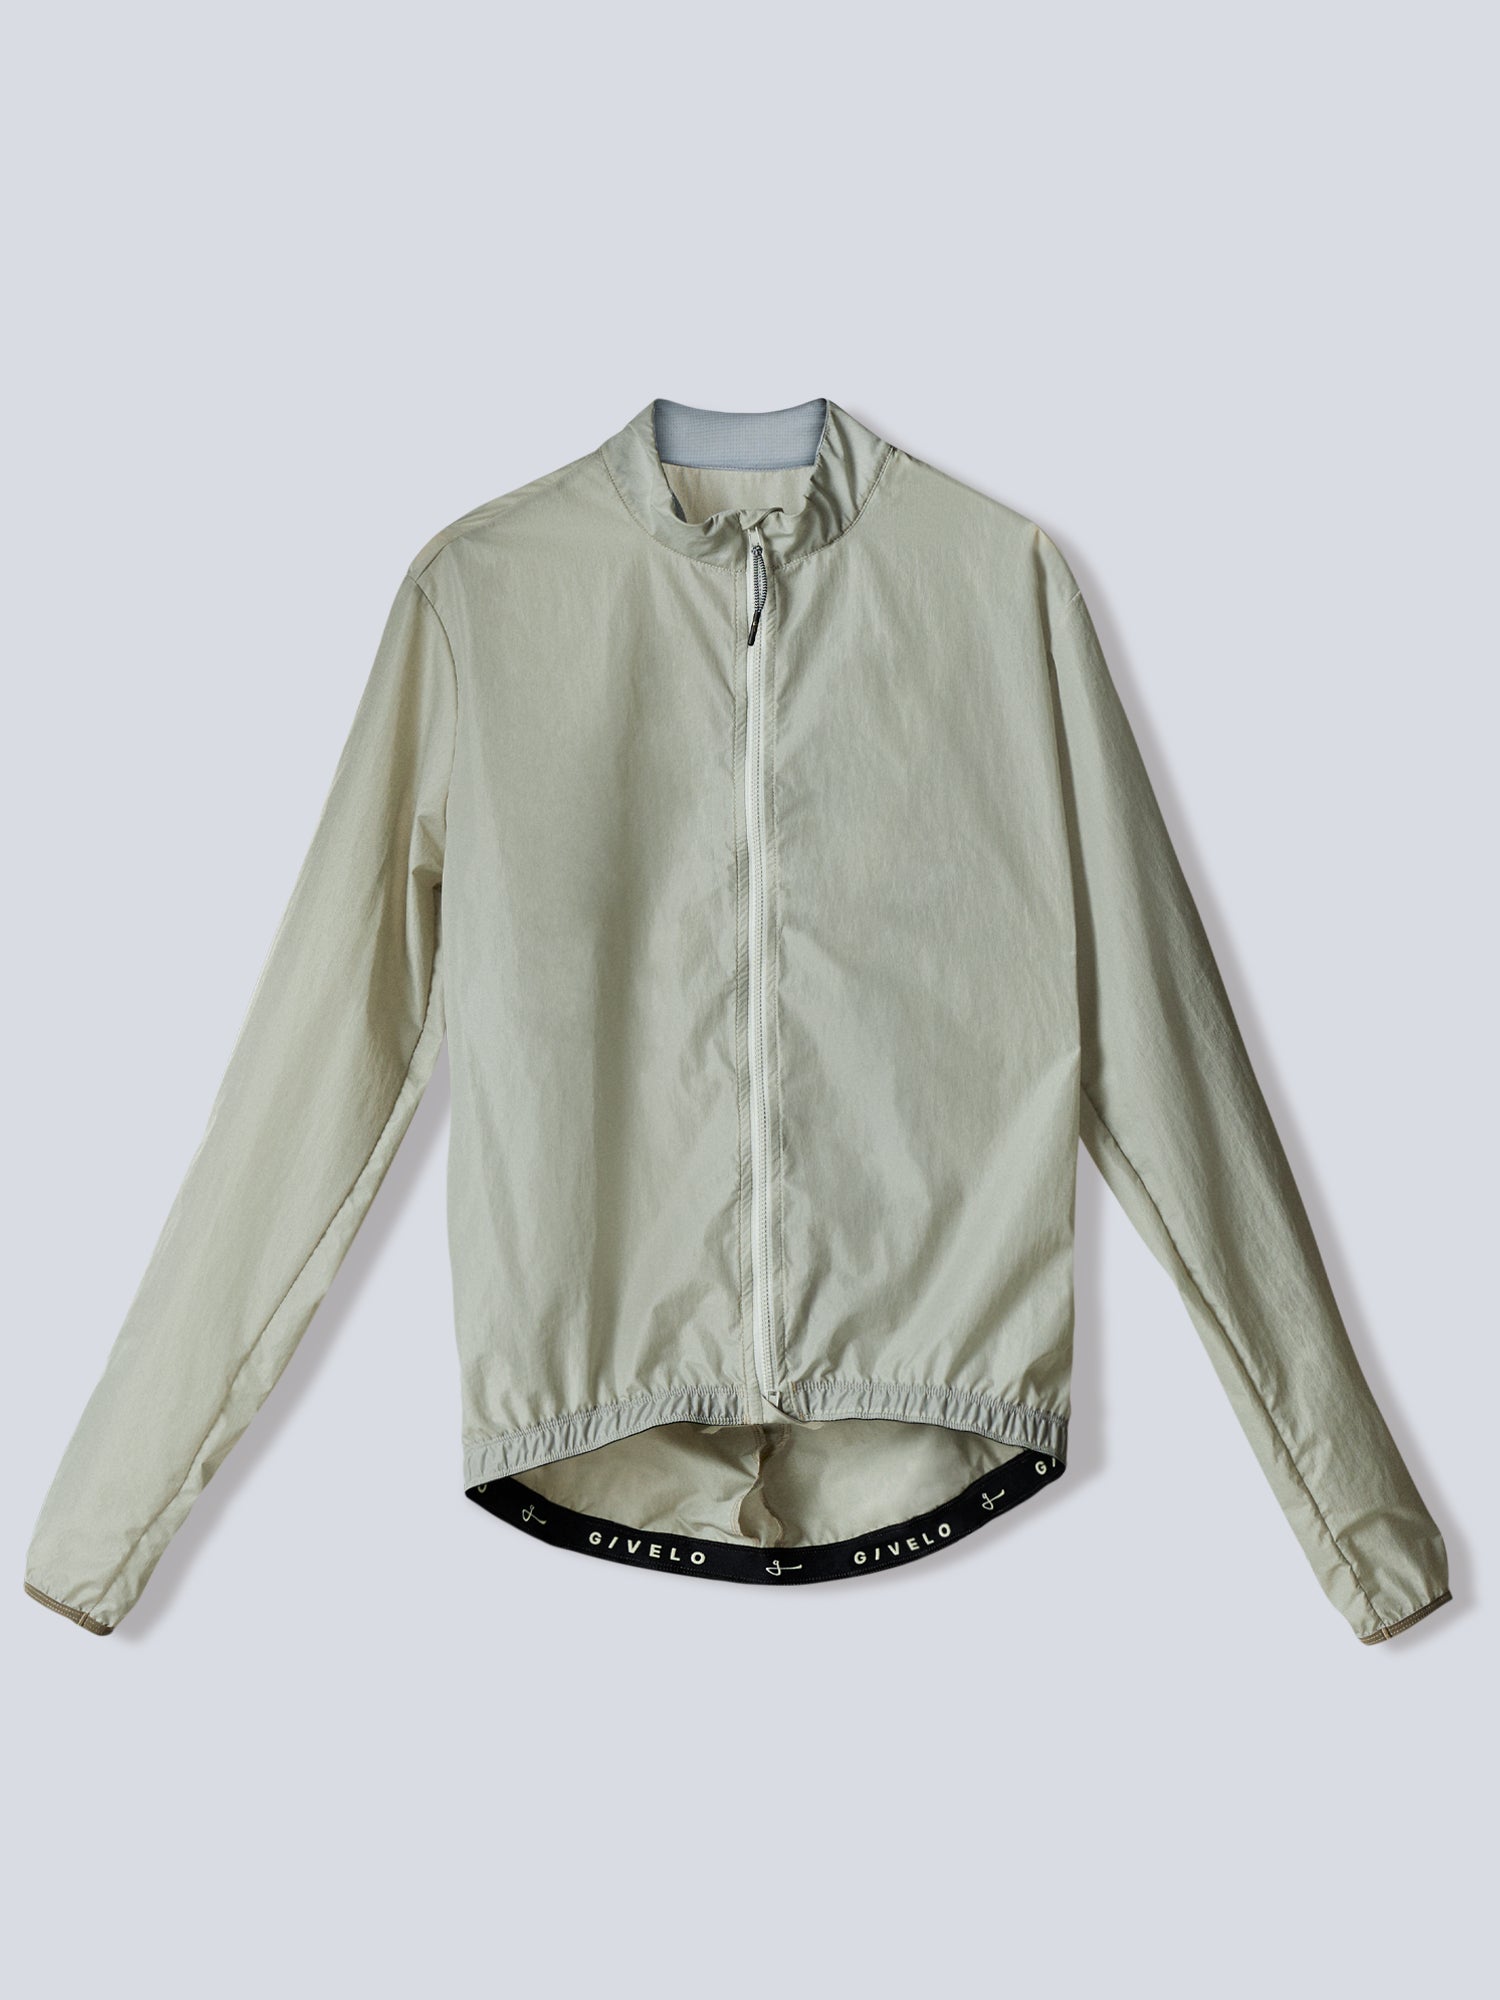 JACKET C.D.A SHELL PEARL